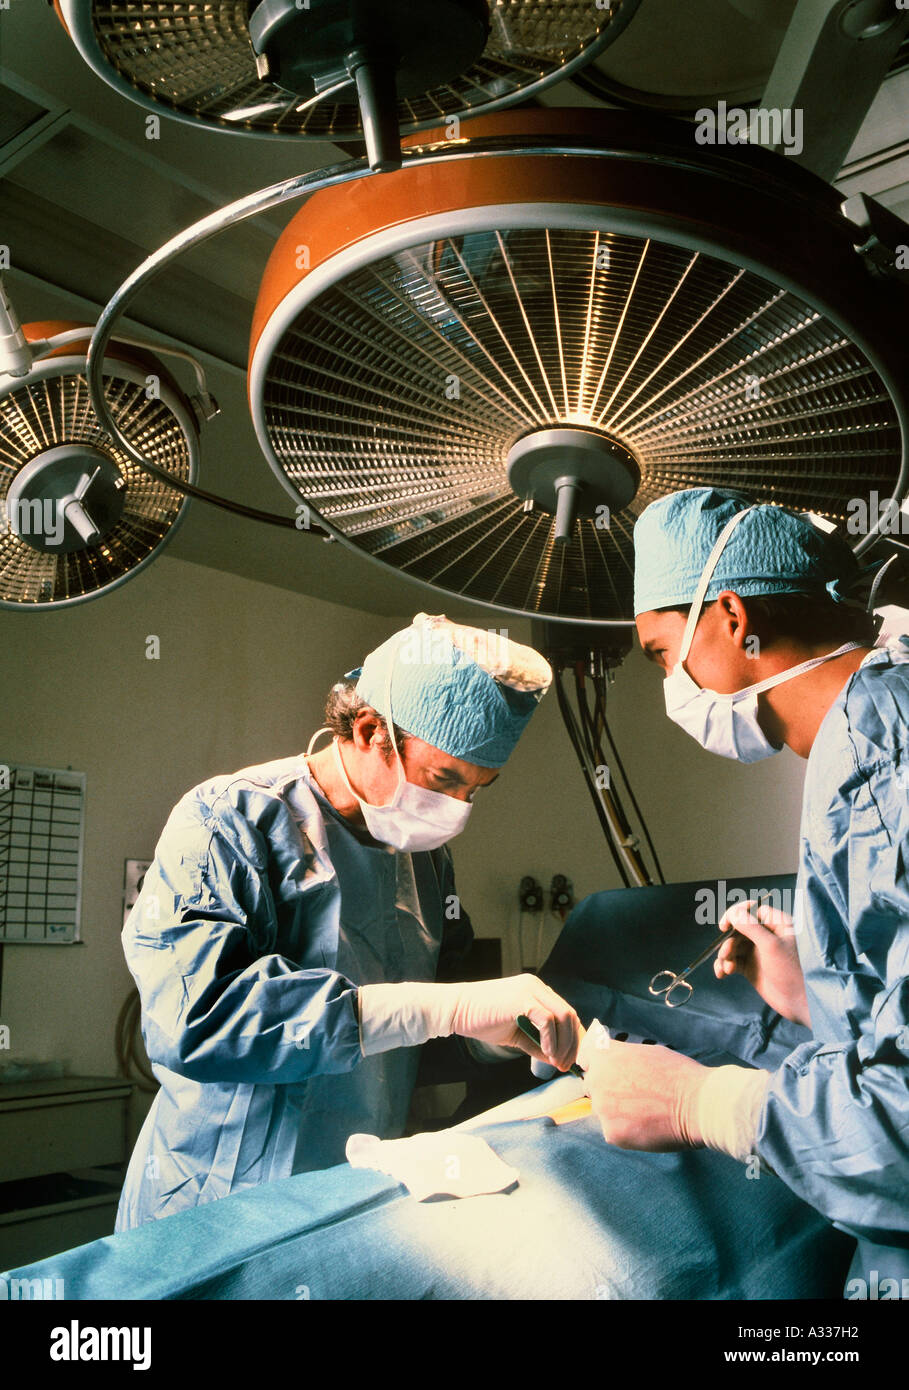 Surgeon in operating room A75 Stock Photo